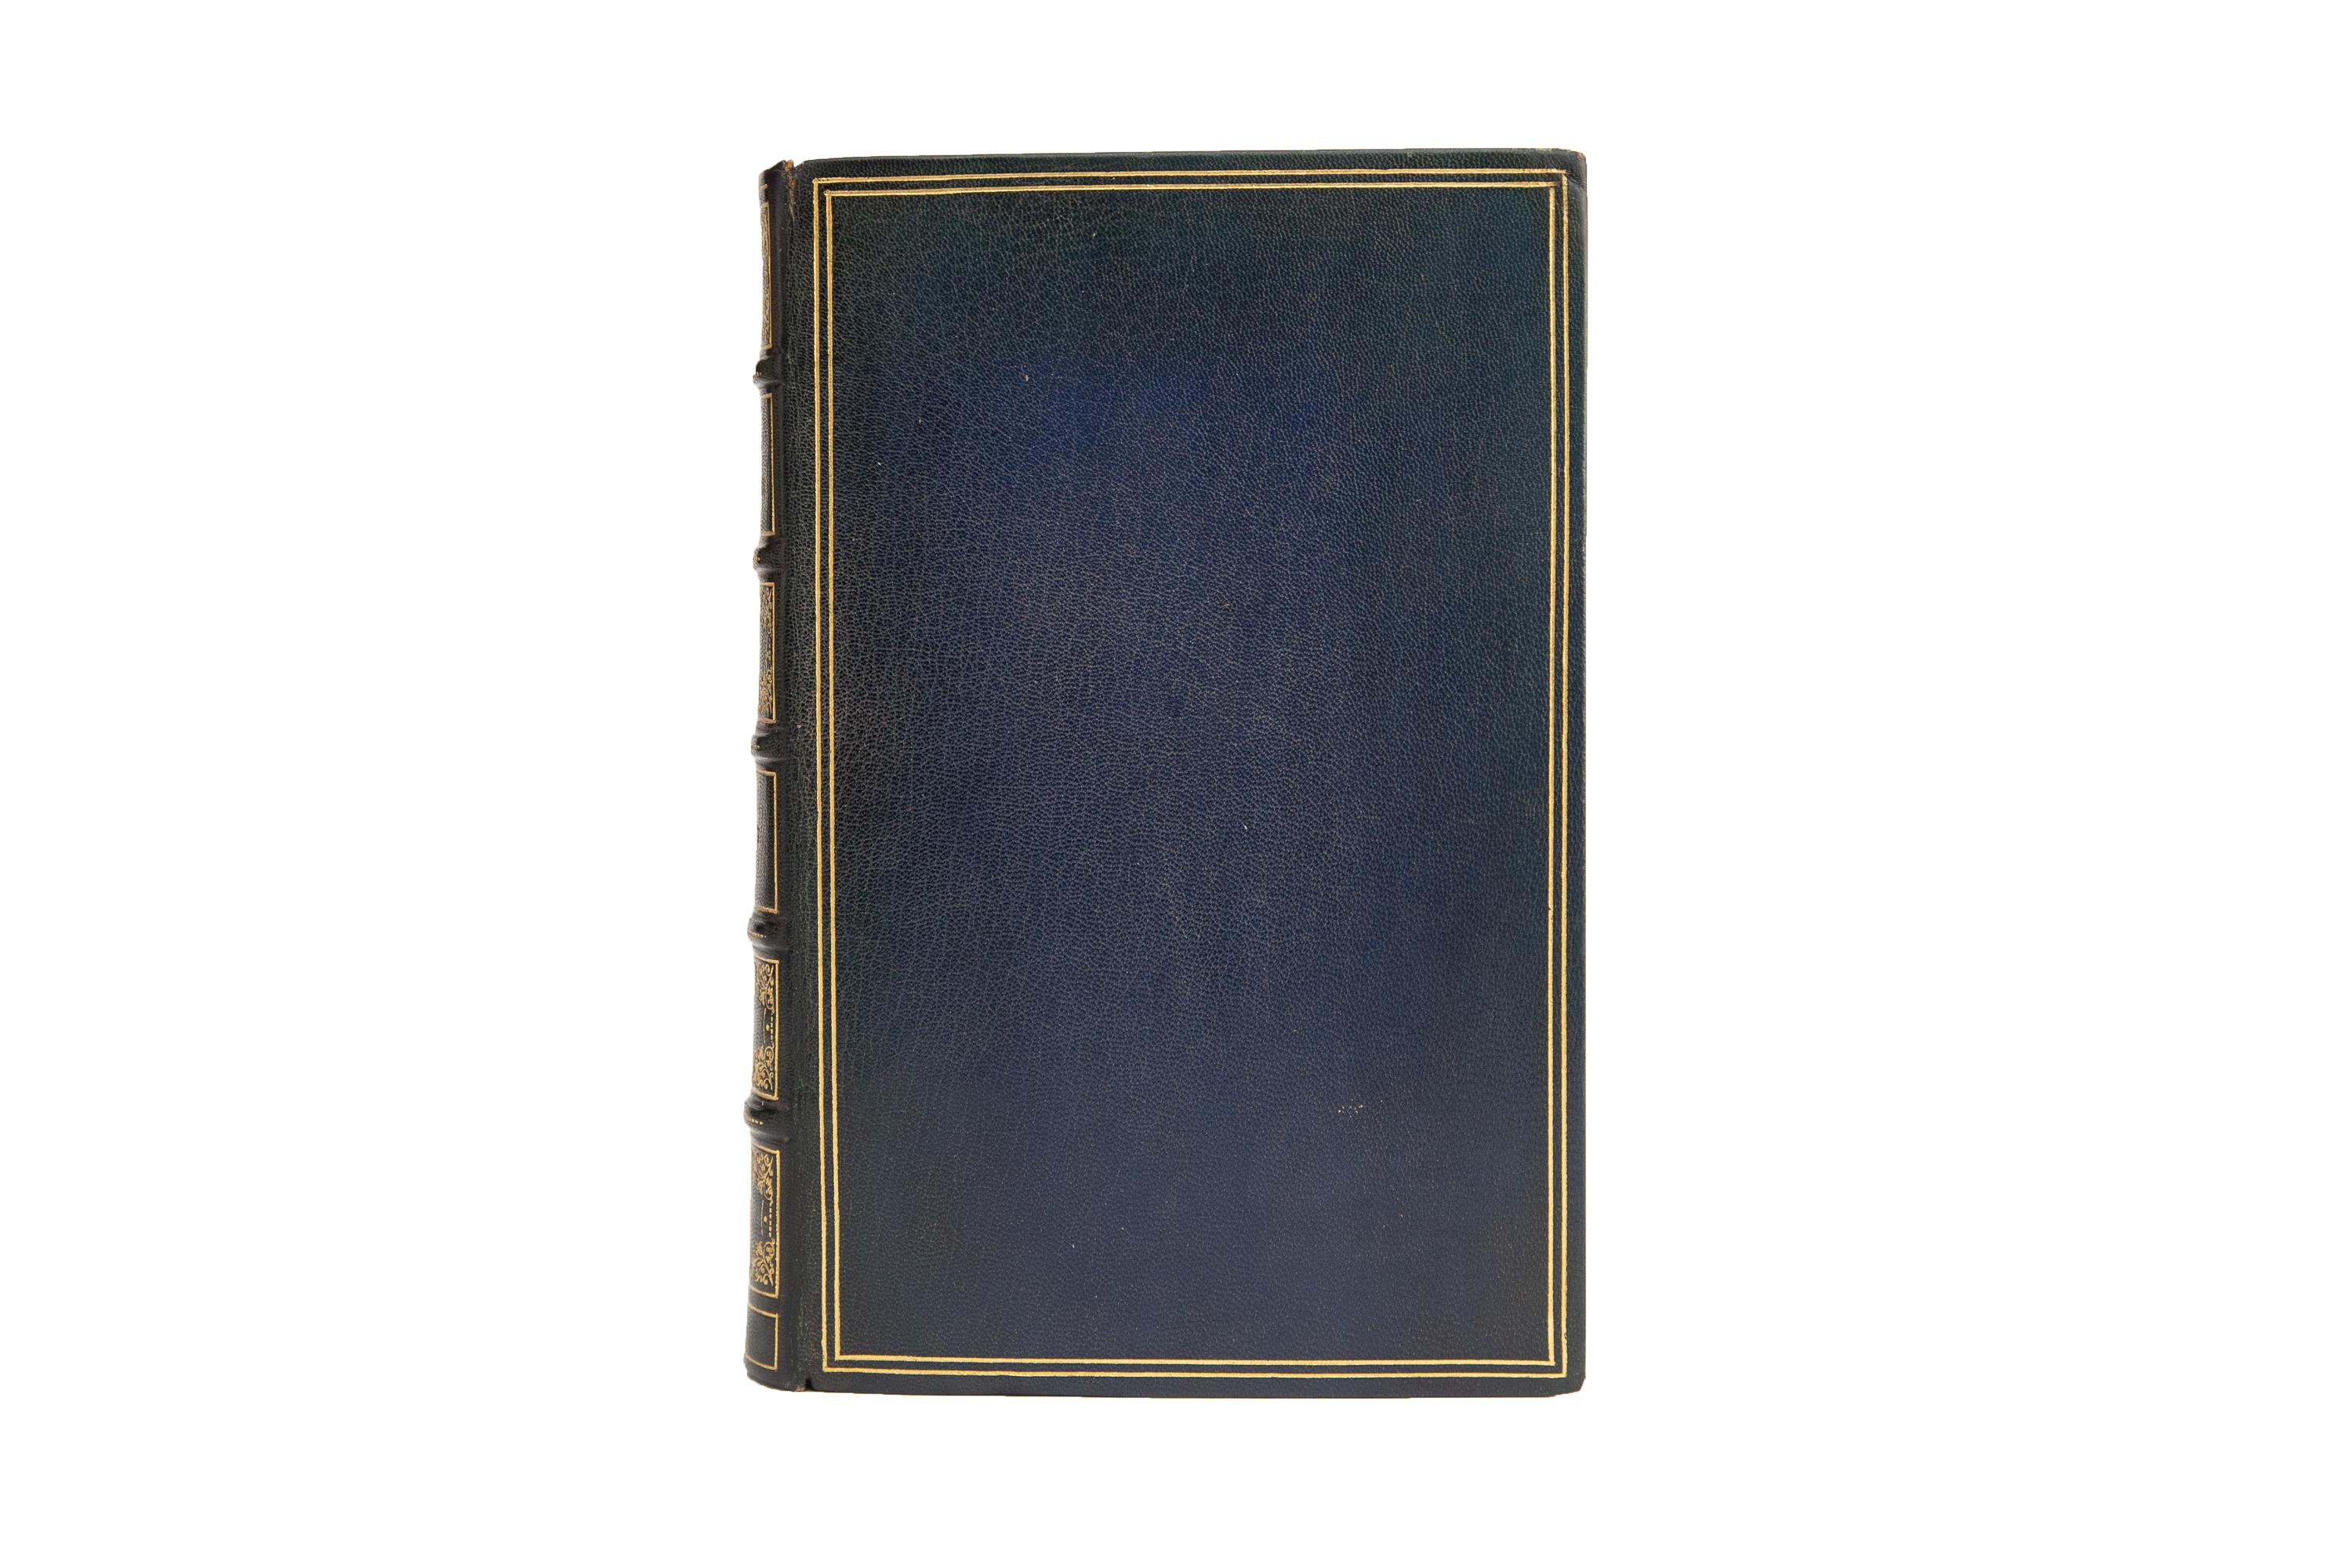 1 Volume. John Bartlett, Familiar Quotations. Centennial Edition. Bound in full blue morocco with covers double-ruled in gilt tooling. Raised bands gilt with panels displaying ornate gilt detailing and label lettering. The top edge is gilt with gilt